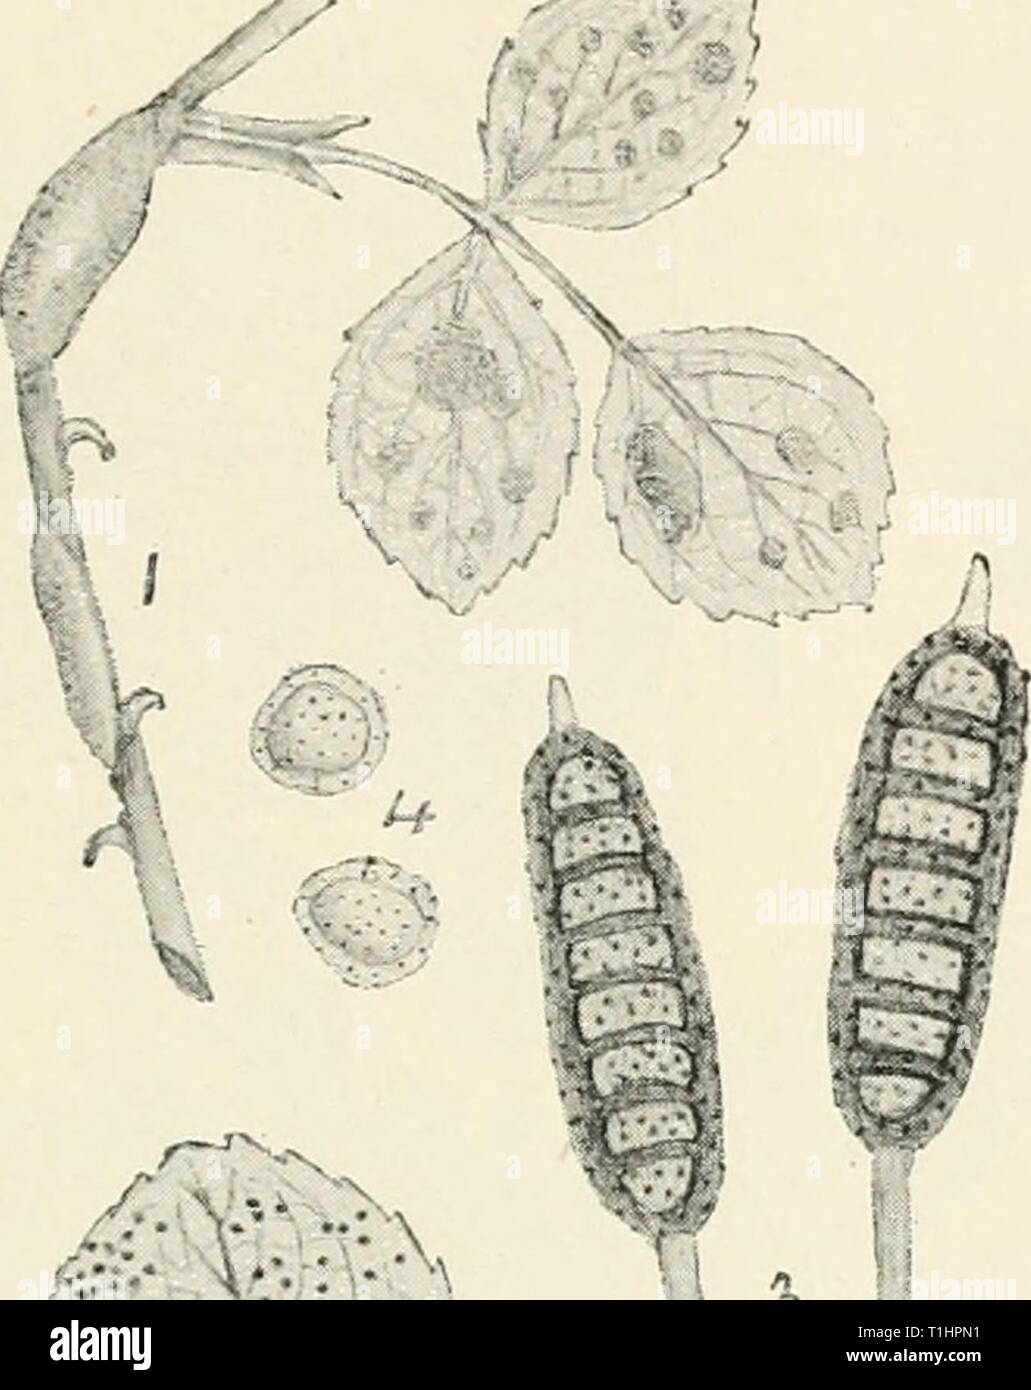 Diseases of cultivated plants and Diseases of cultivated plants and trees  diseasesofcultiv00massuoft Year: [1910?]  PHRAGMIDIUM 313 dark brown, 3-8 septate, 75-100X26-30 [i, pedicel long, thickened in the middle. The infection in spring depends entirely on the presence of teleutospores present on fallen leaves, consequently all fallen leaves should be either buried by digging during the winter or by sweeping up and burning. Plants that have    Fig. 92.—Plu-agmidium stibcorticatum. i, rose branch and leaves with aecidium stage of fungus ; 2, rose leaf with teleutospores ; 3, teleutospores ; 4, Stock Photo